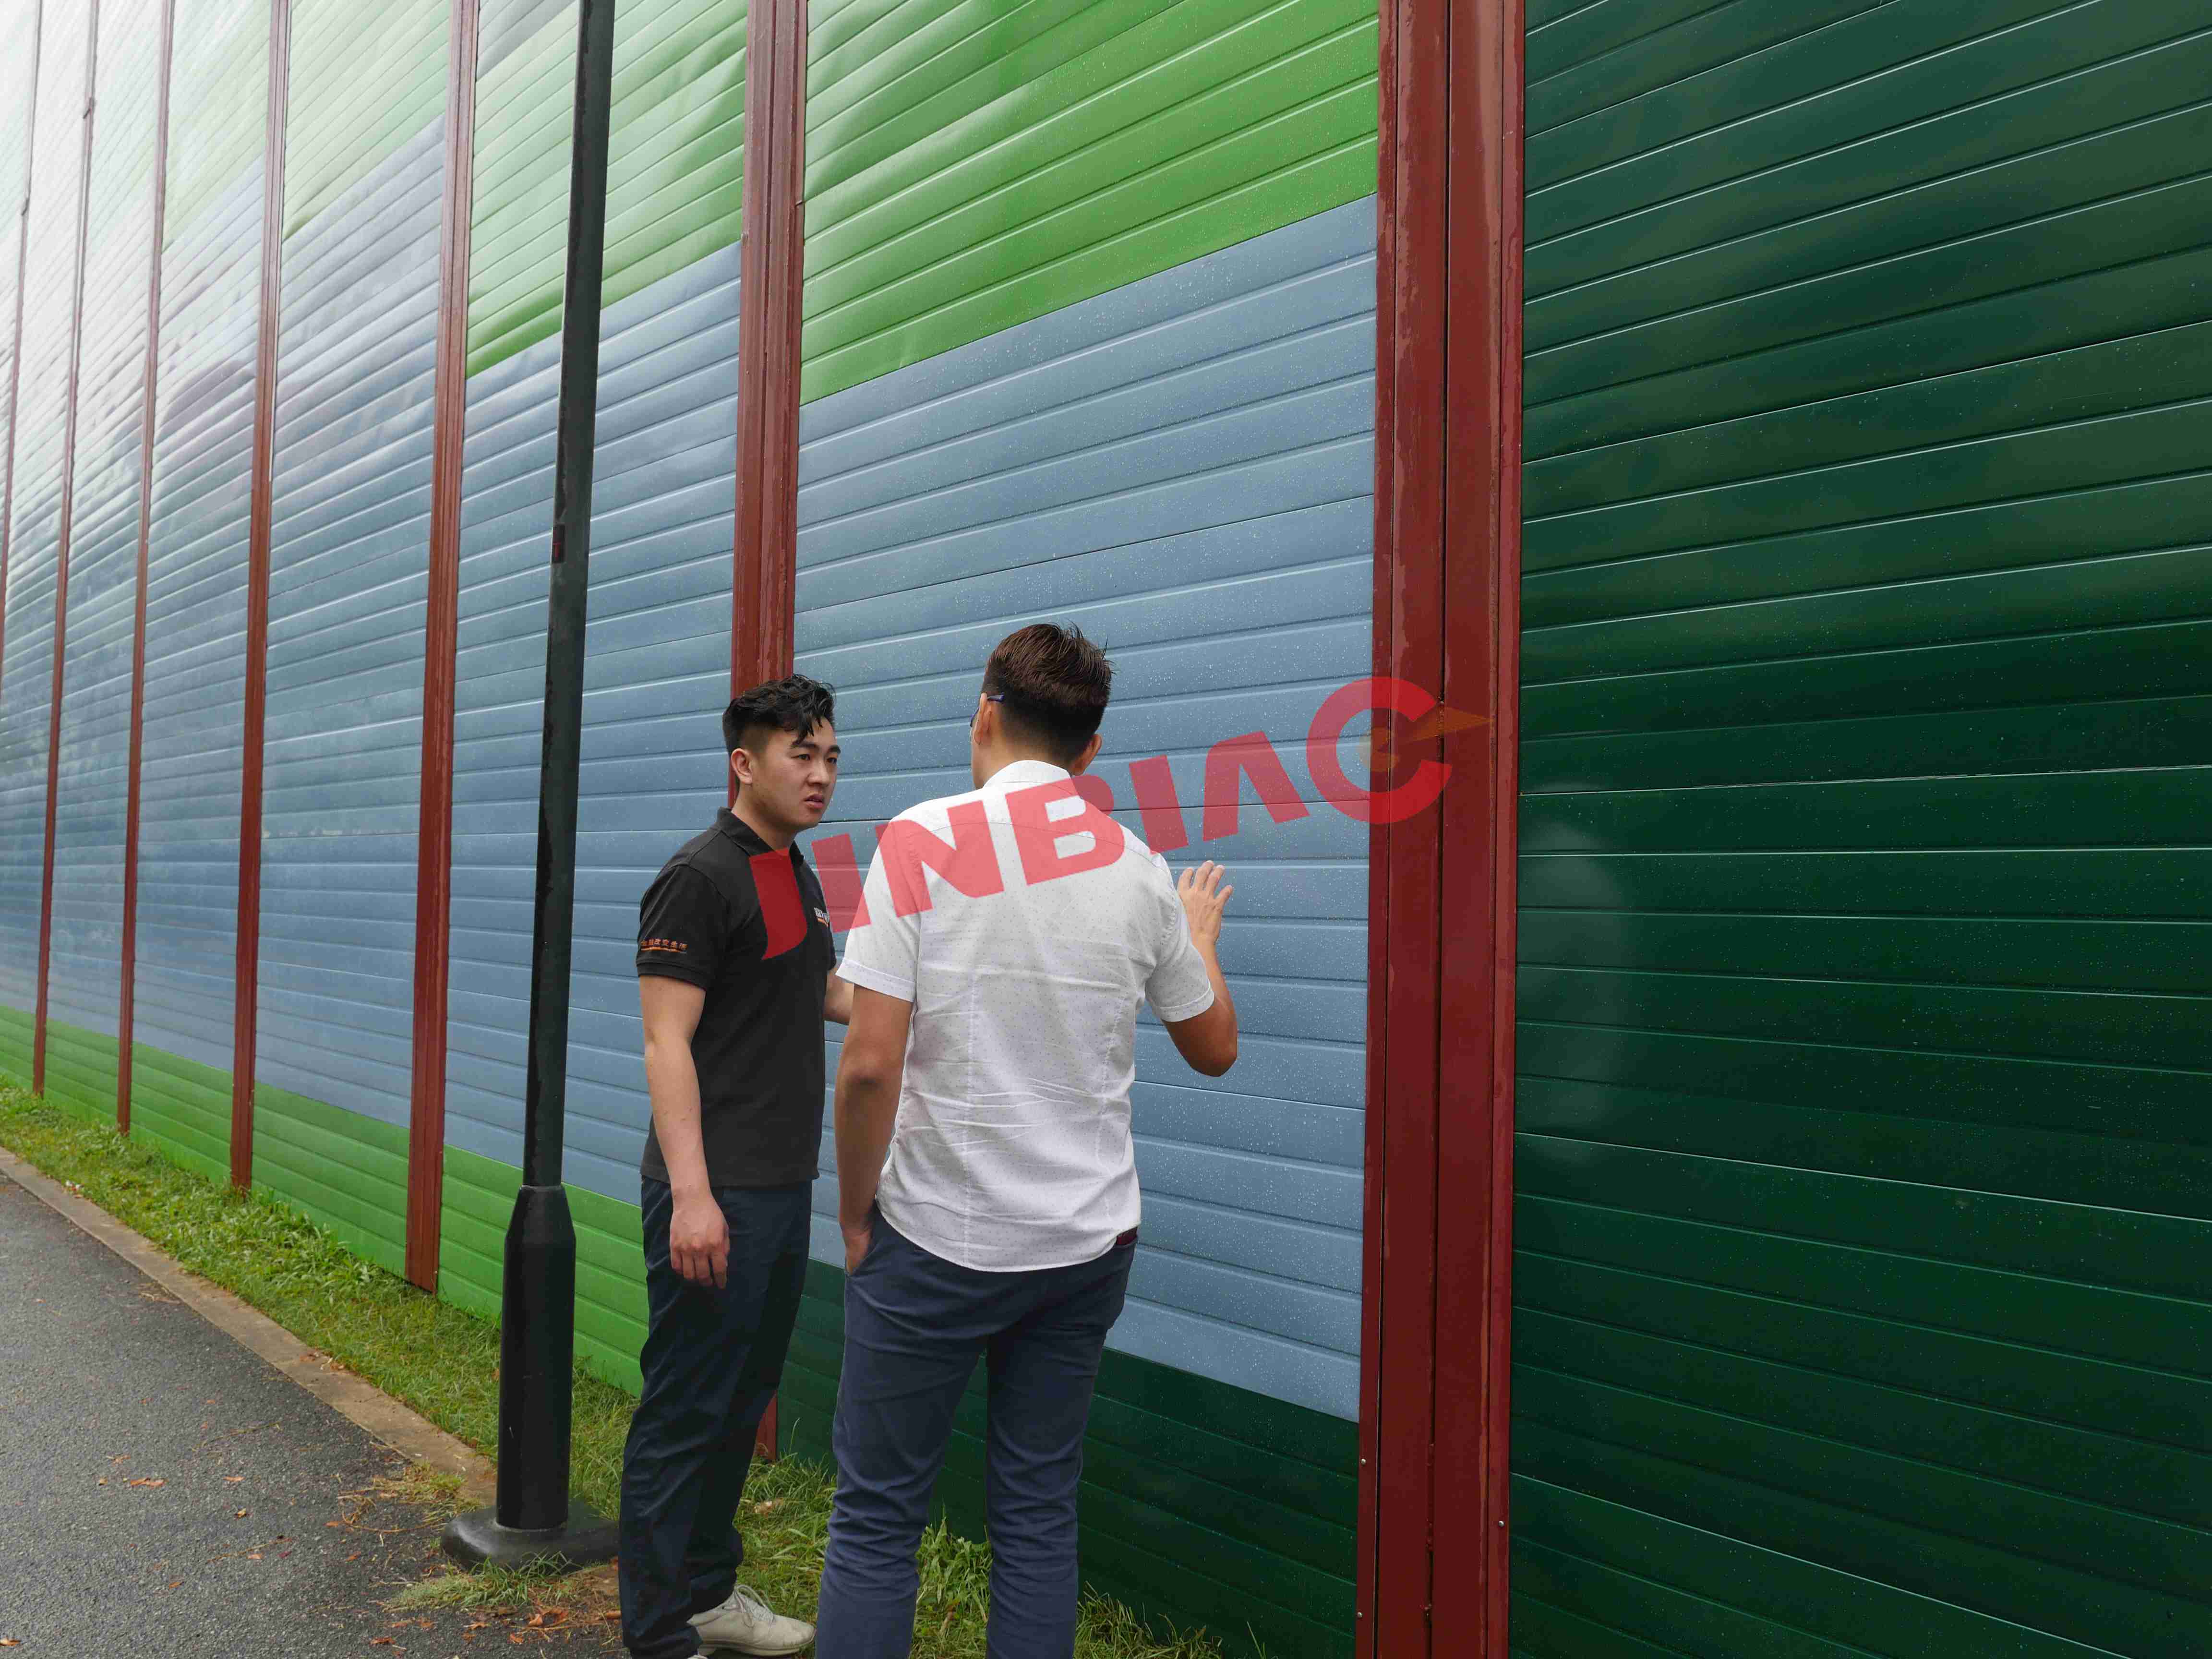 Temporary noise barrier for construction sound reduction jinbiao